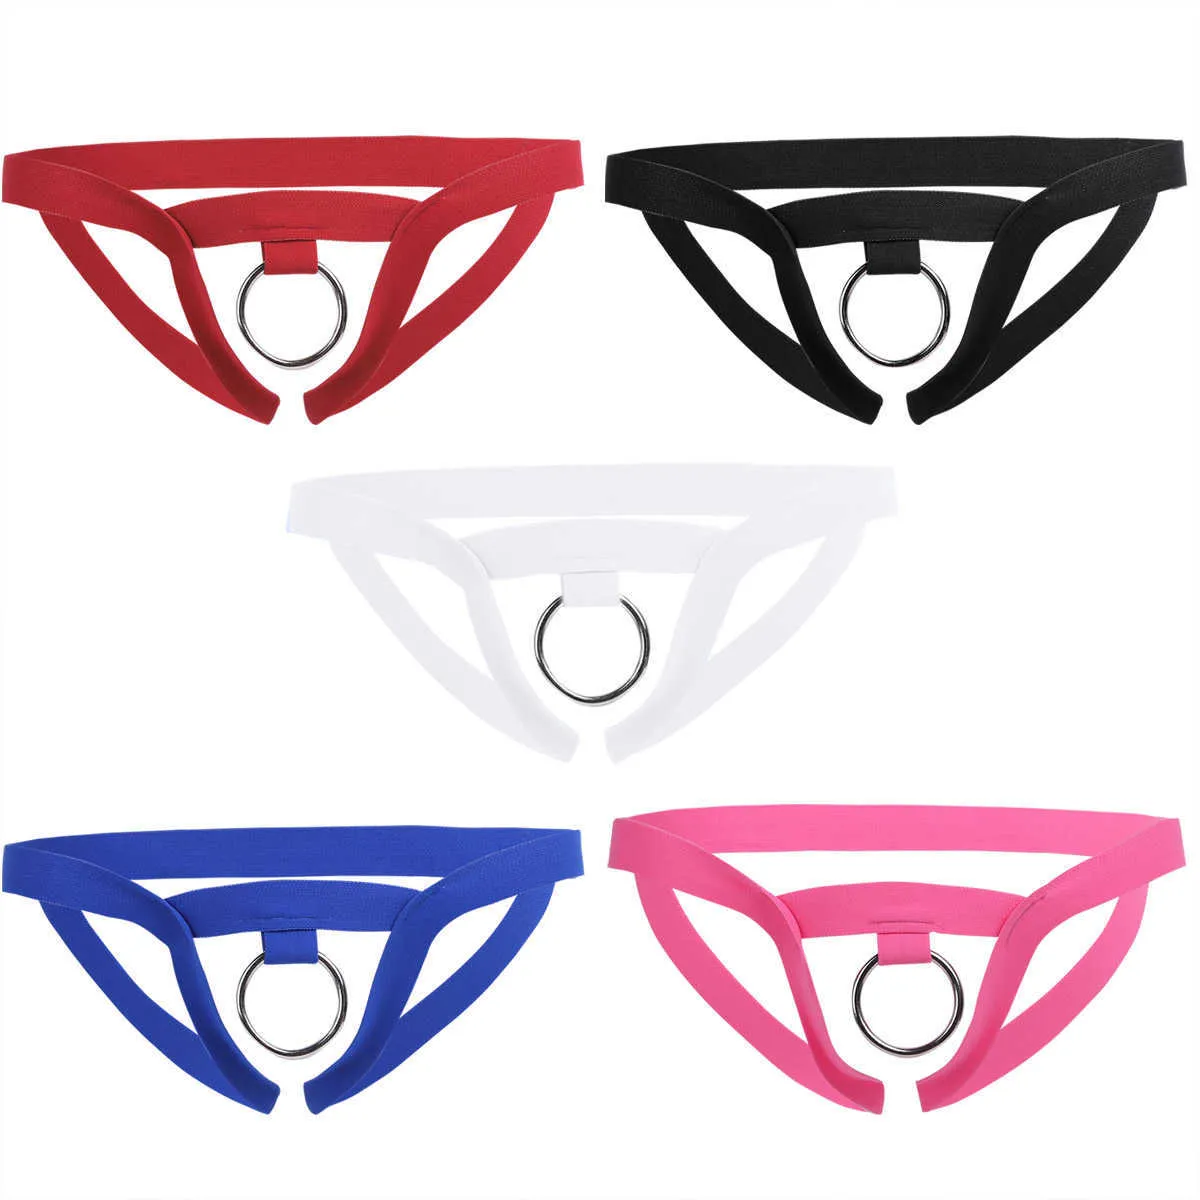 Men Lingerie Sex Gay Male Panties Crotchless G-string Open Butt Bondage Gear Pouch Sissy Penis Underwear Underpants with O-Ring P0812